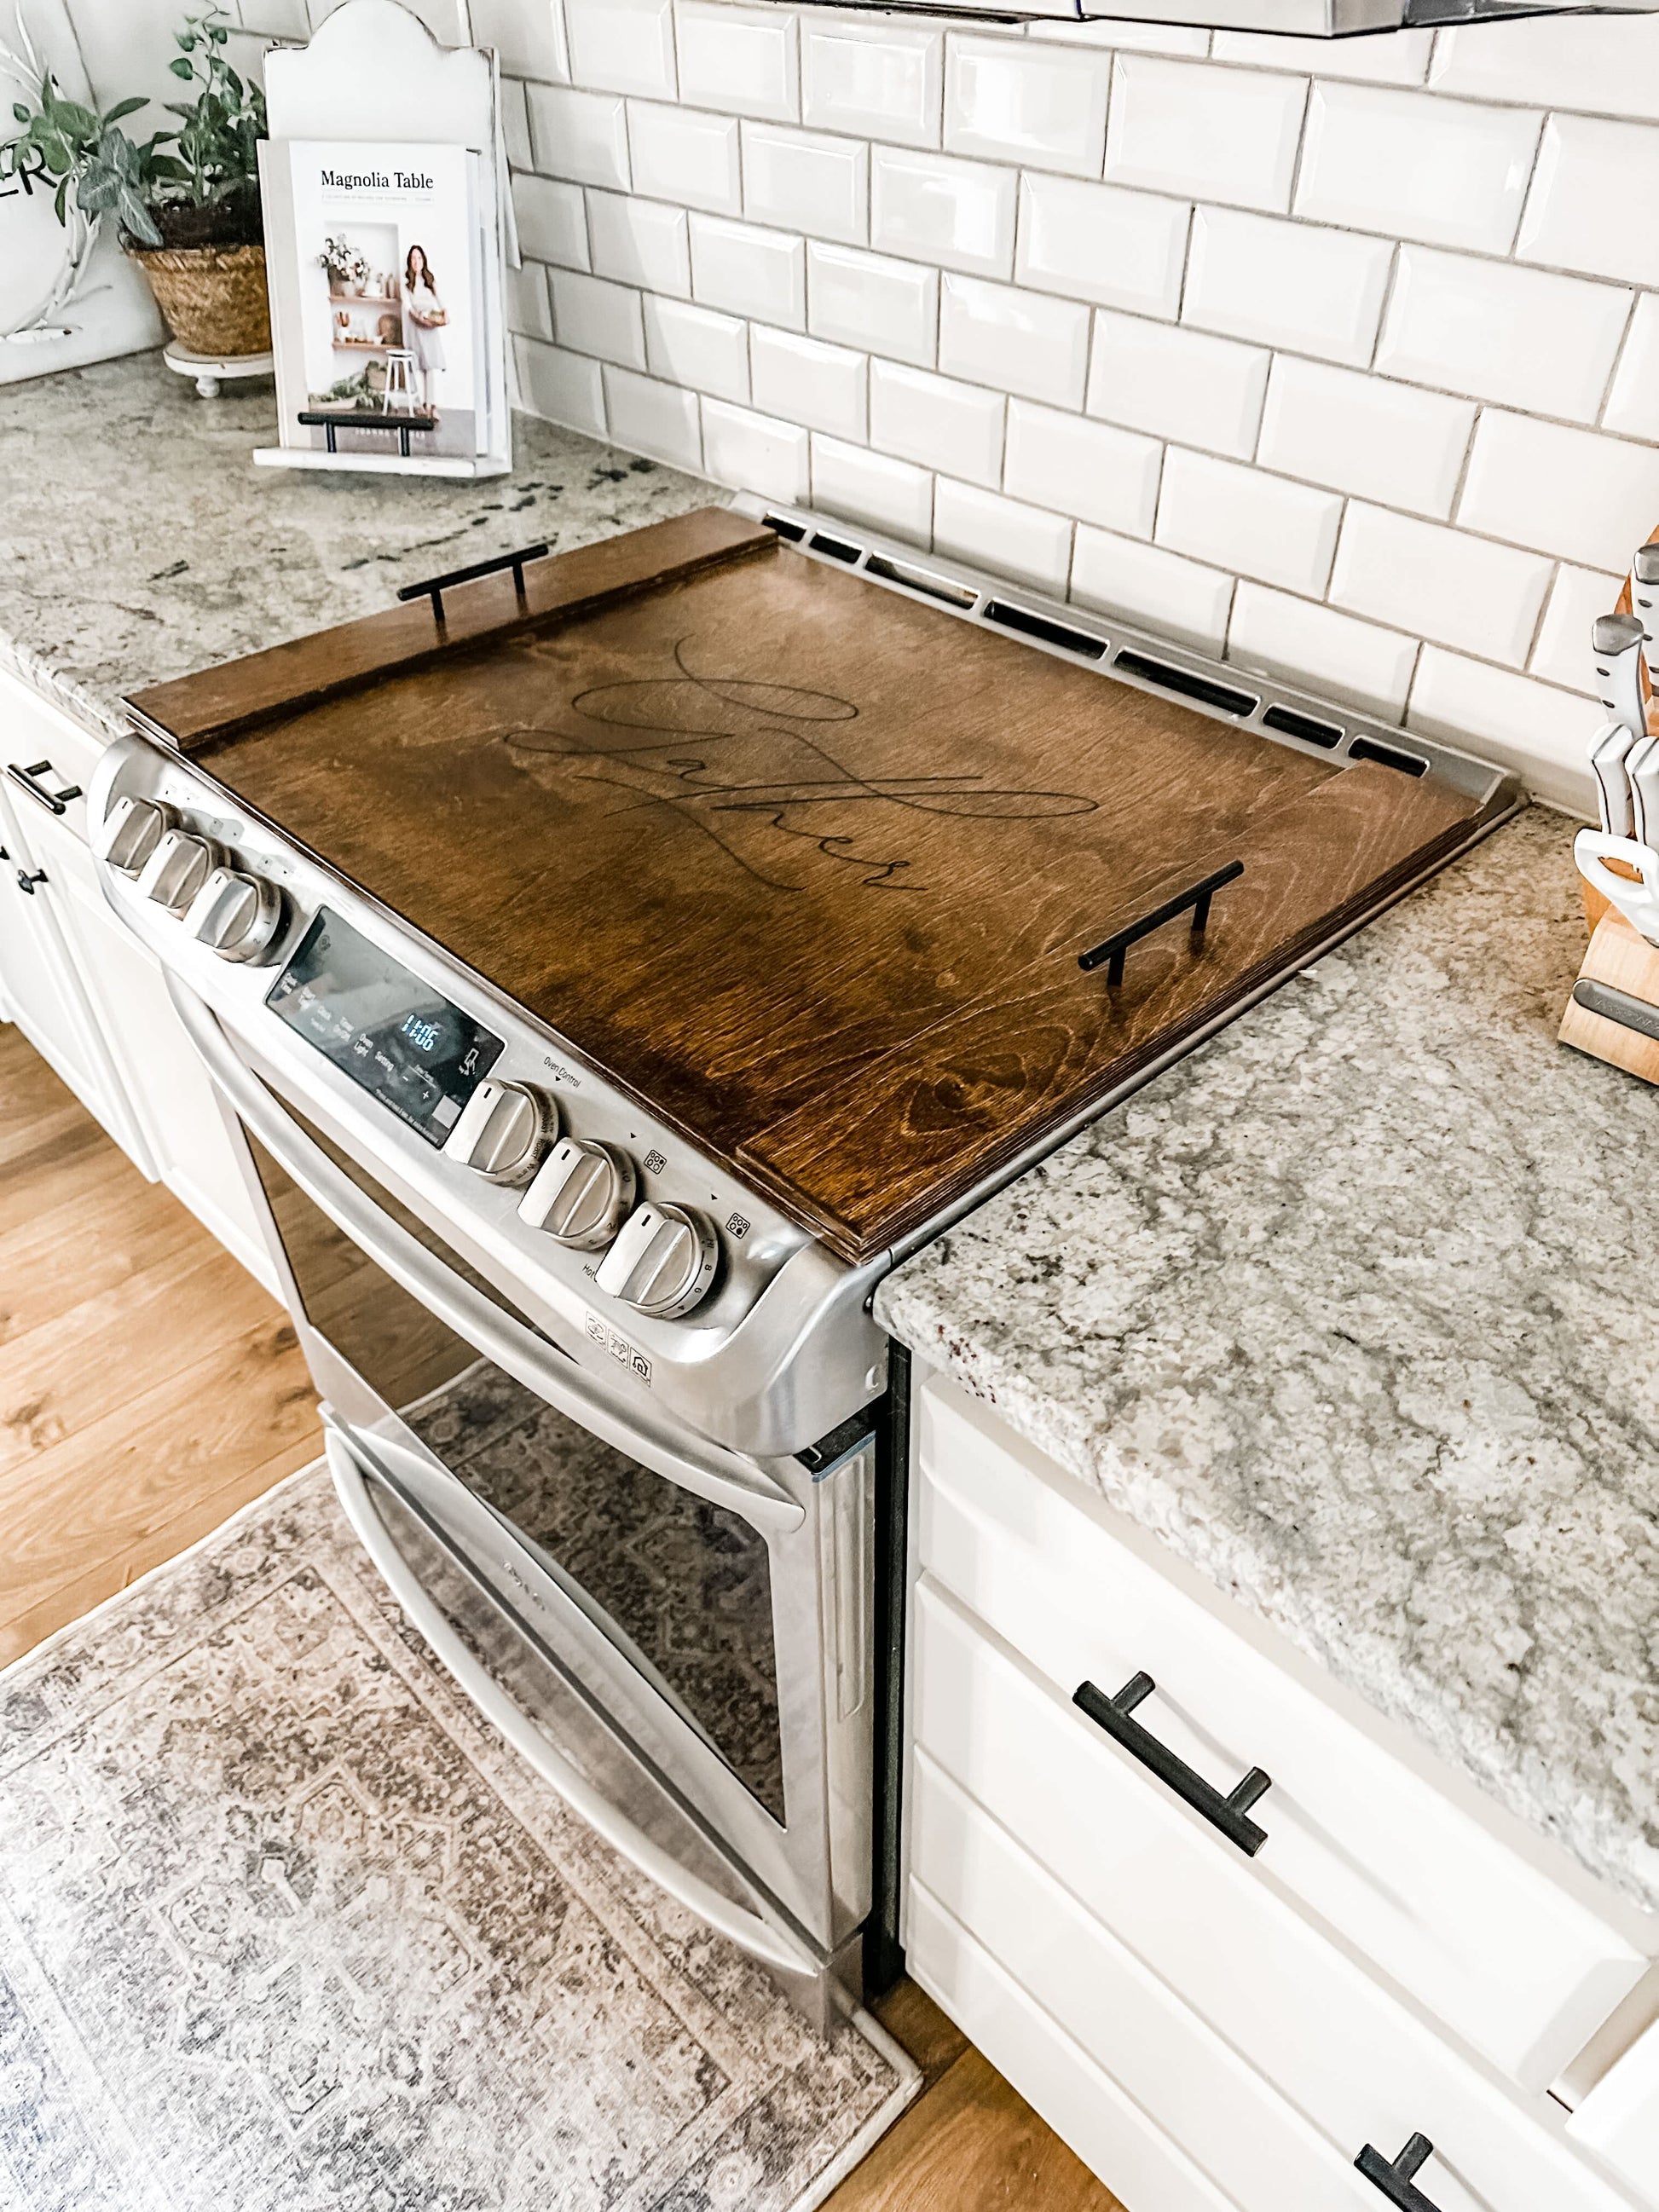  Noodle Board Stove Cover for Gas Stove, Wood Stove Top Covers  for Electric Stove, 30x22 Inch Wooden Stove Top Cover Stove Cover Board  with Handles, Farm House Style Electric Stove Top